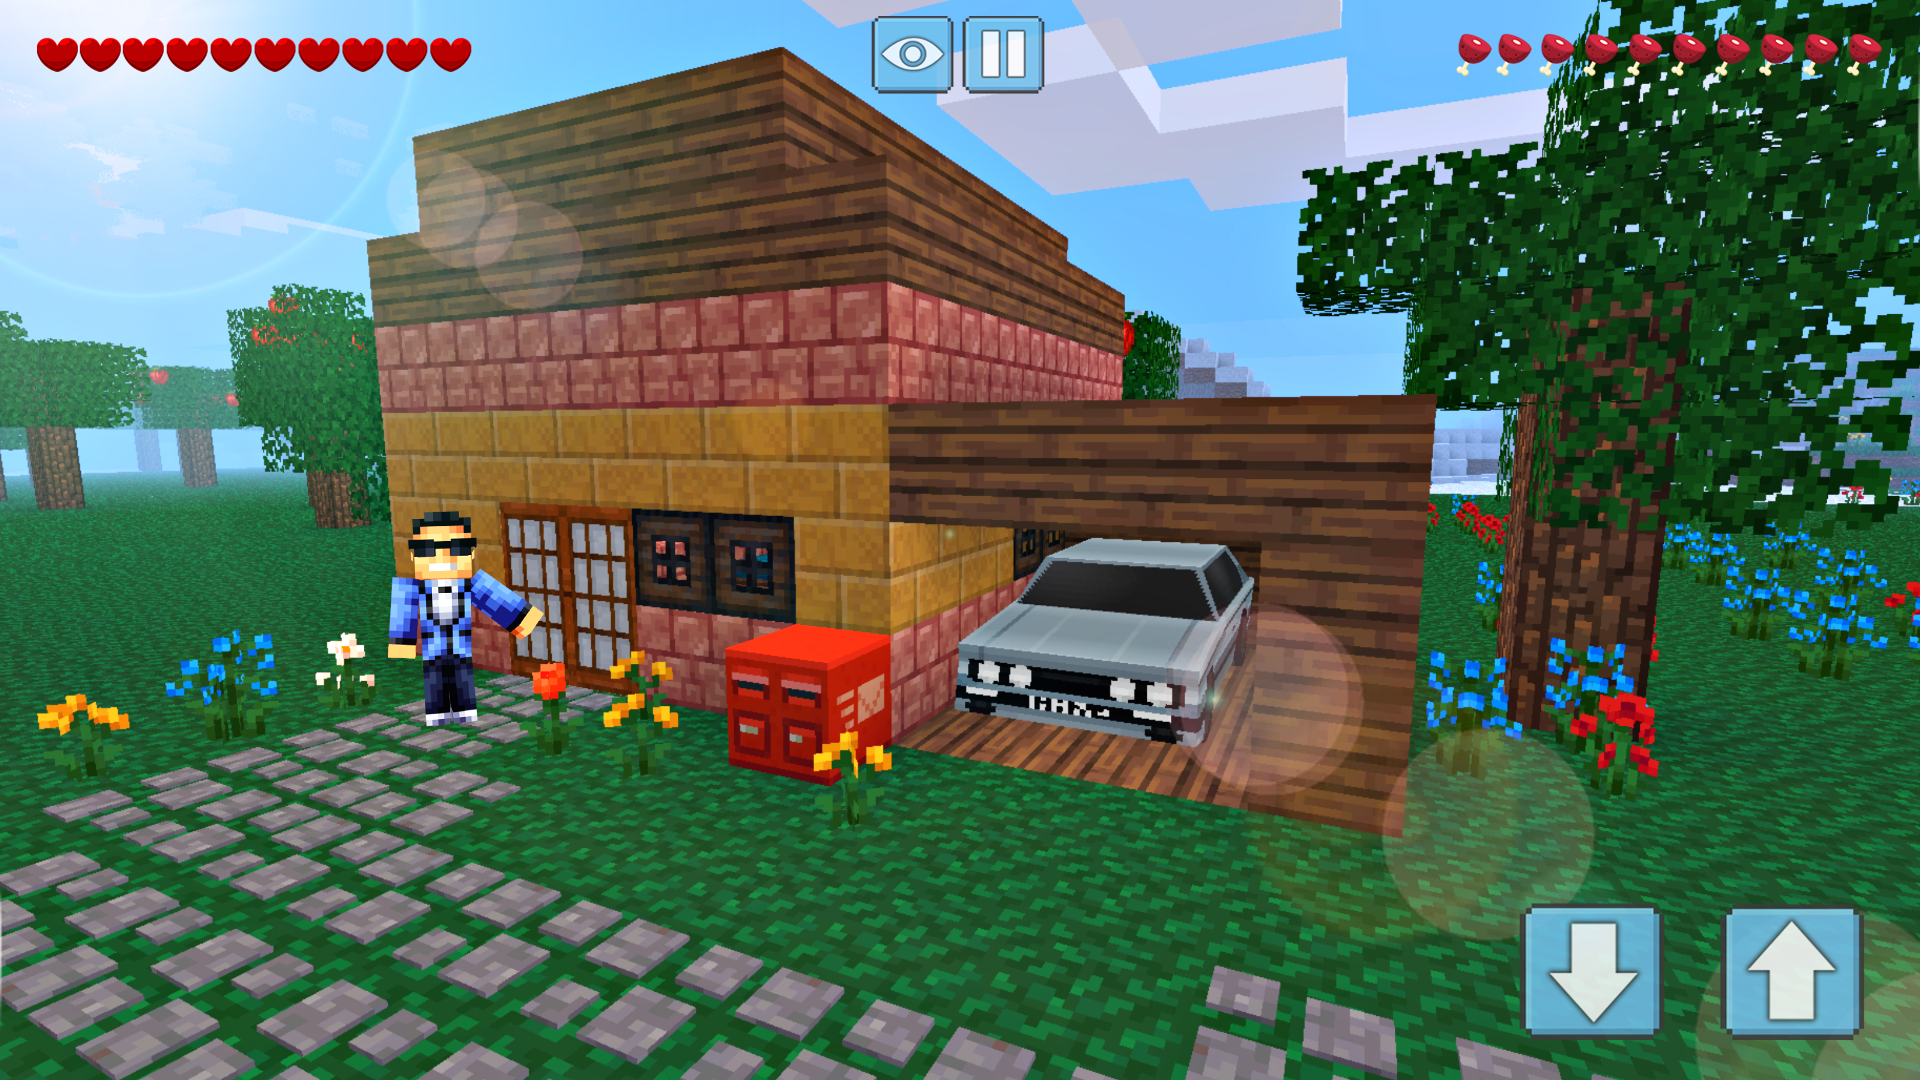 Block Craft World 3D APK 1.5.4 for Android – Download Block Craft World